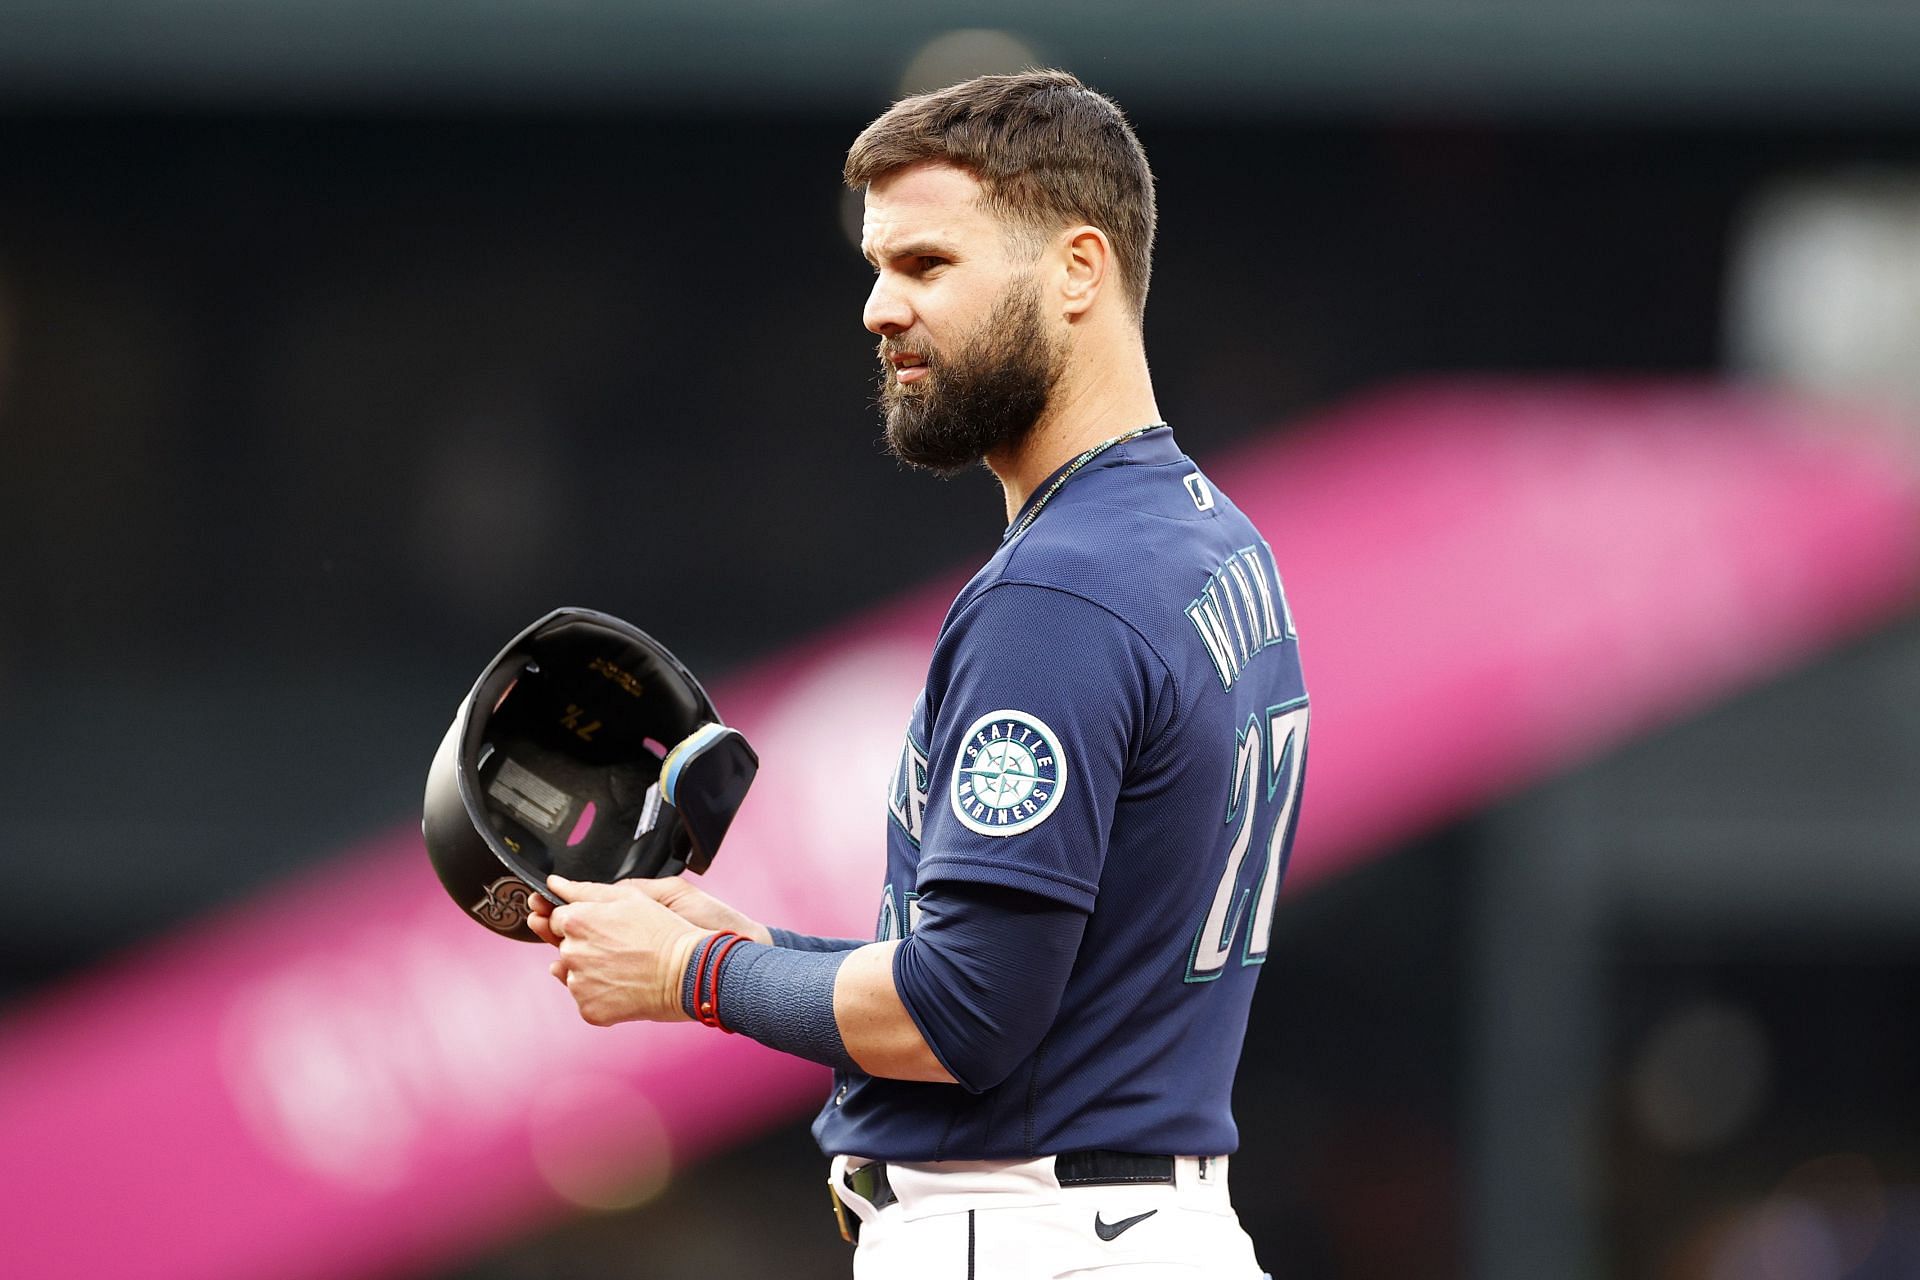 Happy flight - Jesse Winker throws shade at New York Yankees for losing  series to Mariners after going back and forth with home team fans in Bronx